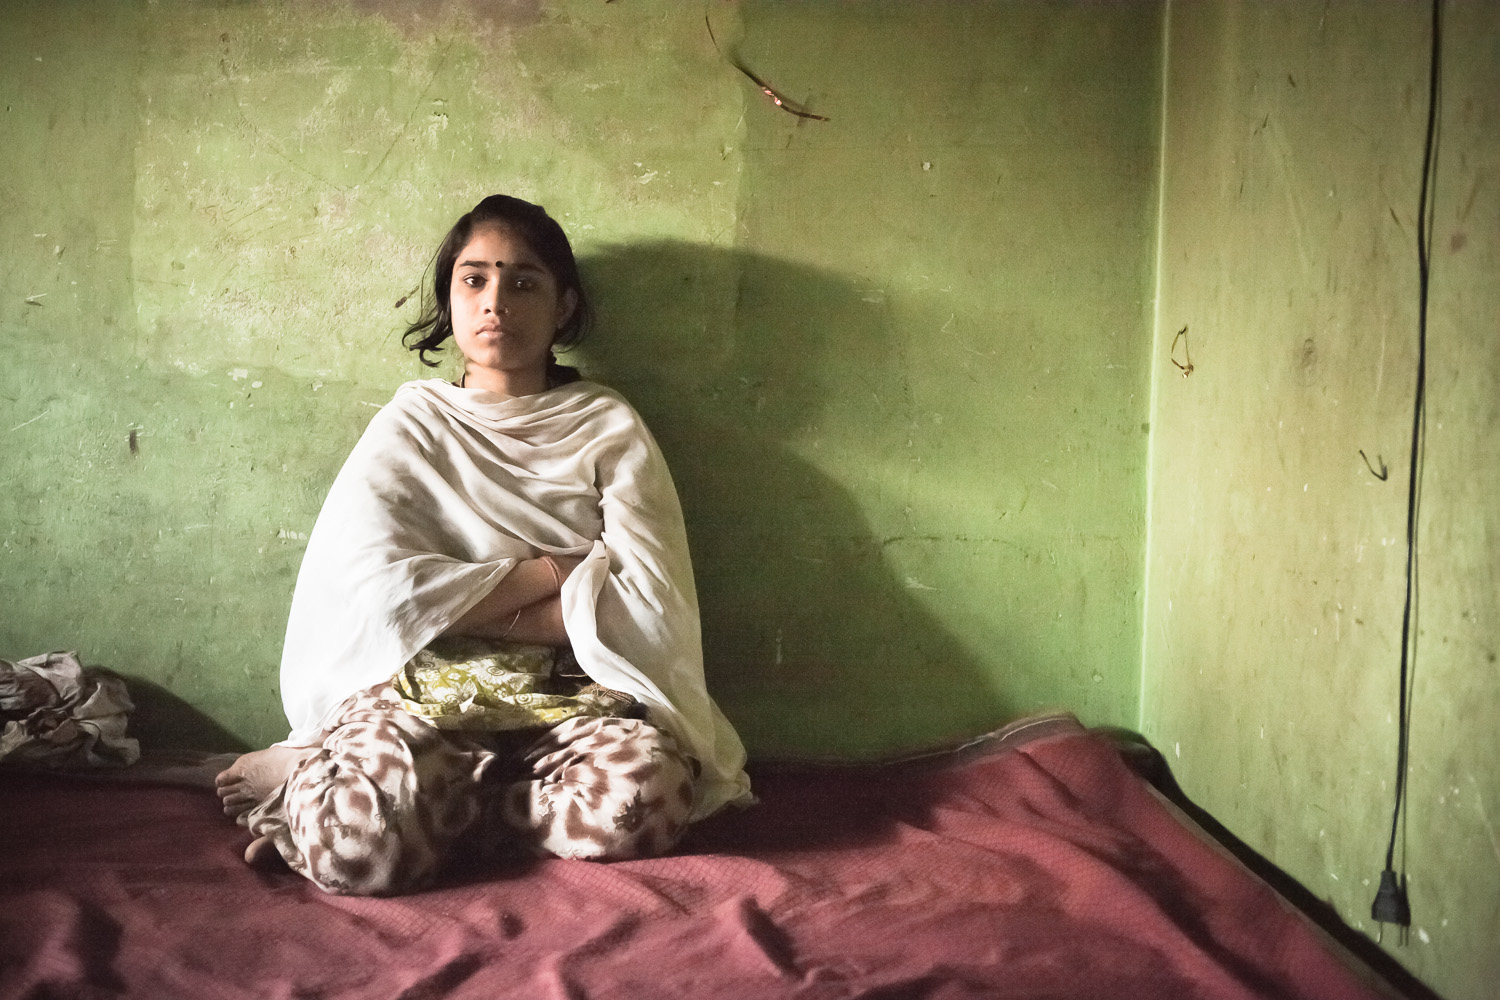  Dhaka, Bangladesh, Geneva Camp. Rina, 14, was married when she was 13. She had to move into Geneva Camp to her husband's family, where she doesn't know anyone. She has been living in Geneva Camp for three months, but she is not a Bihari and she does